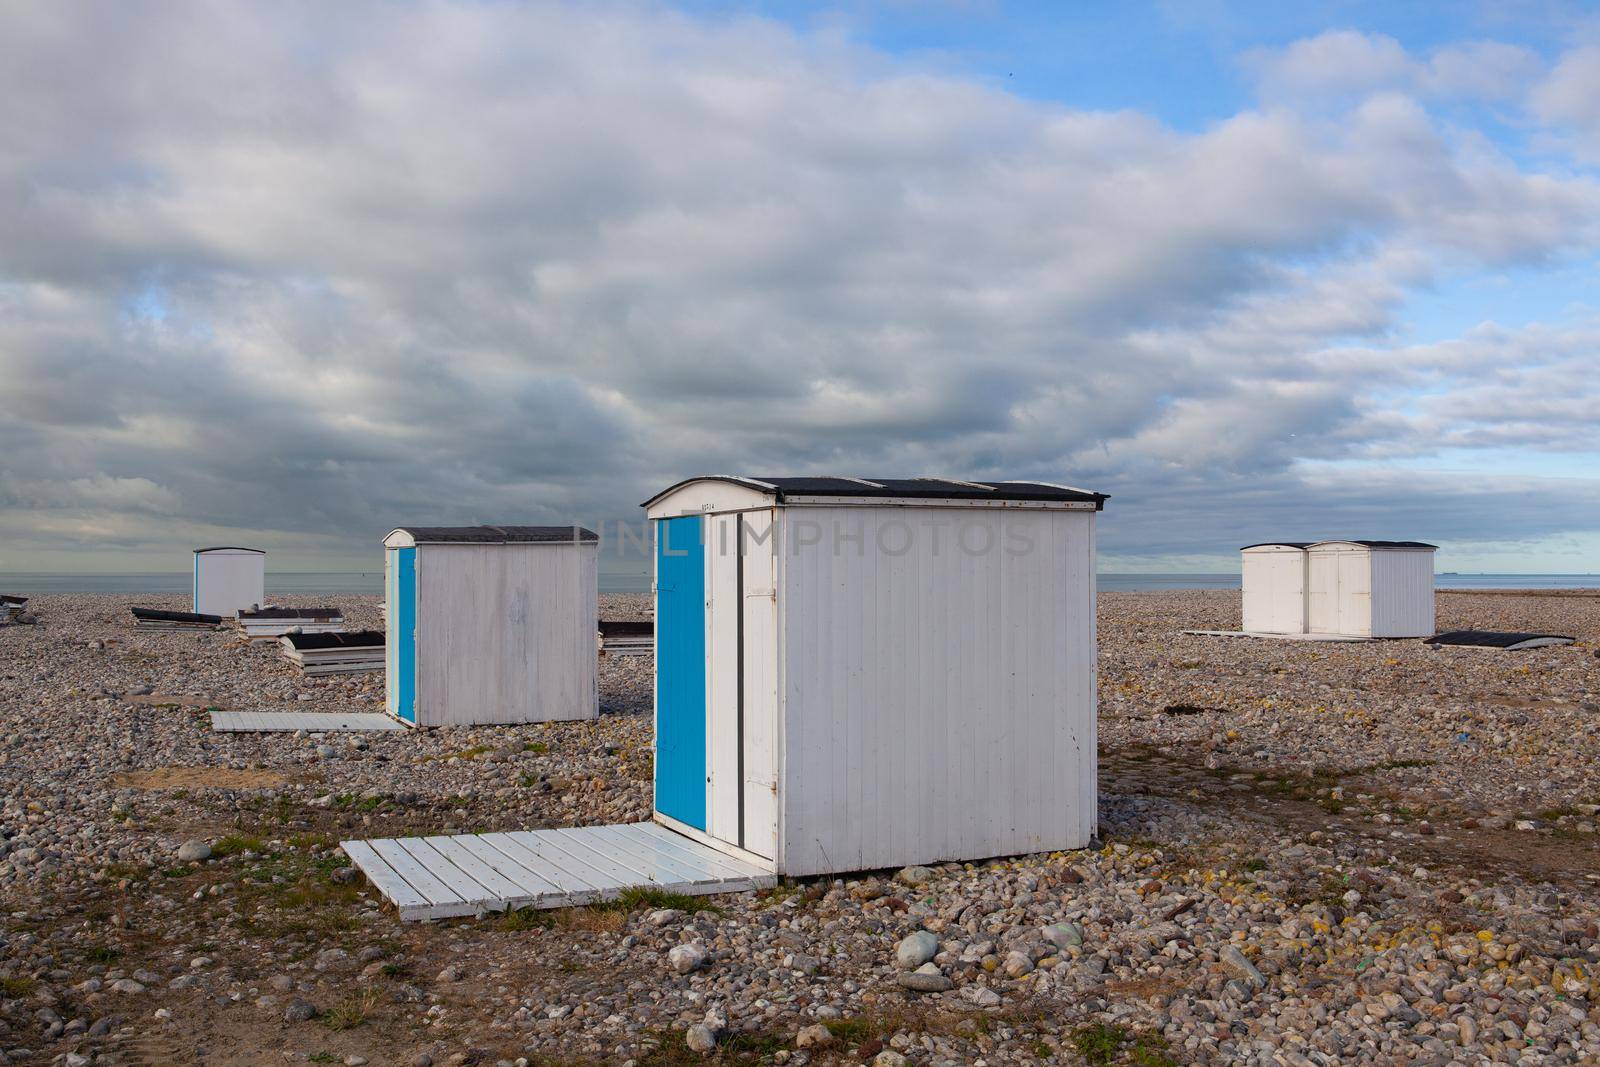 End of season on the beach, Le Havre, France. Small houses or beach cabins of different colors on the beach of Le Havre in France